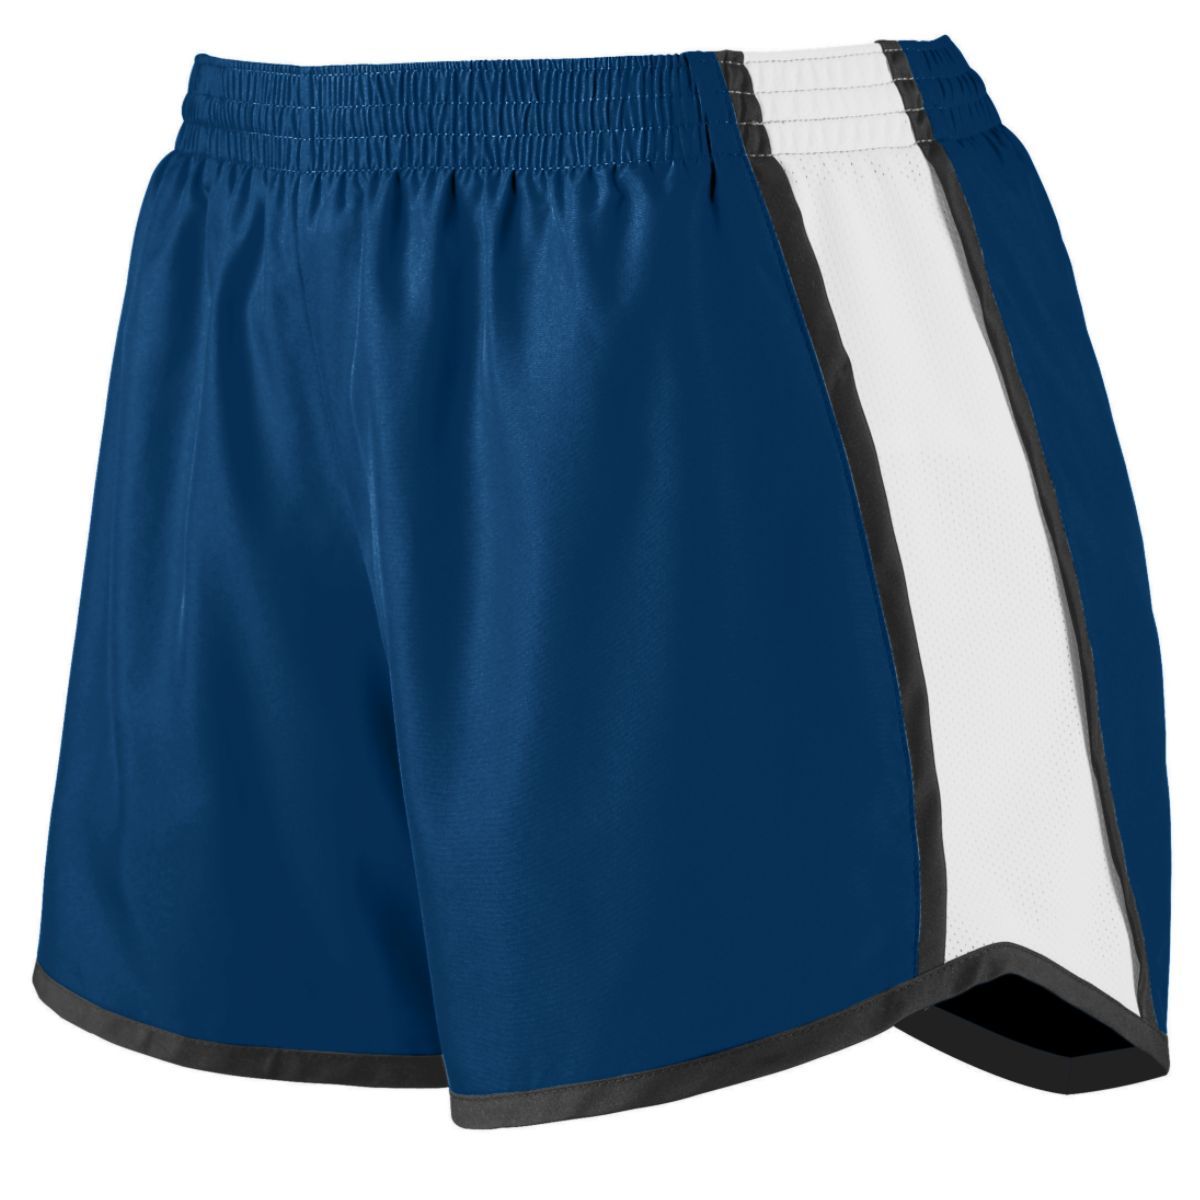 Augusta Sportswear Girls Pulse Team Shorts in Navy/White/Black  -Part of the Girls, Augusta-Products, Volleyball, Girls-Shorts product lines at KanaleyCreations.com